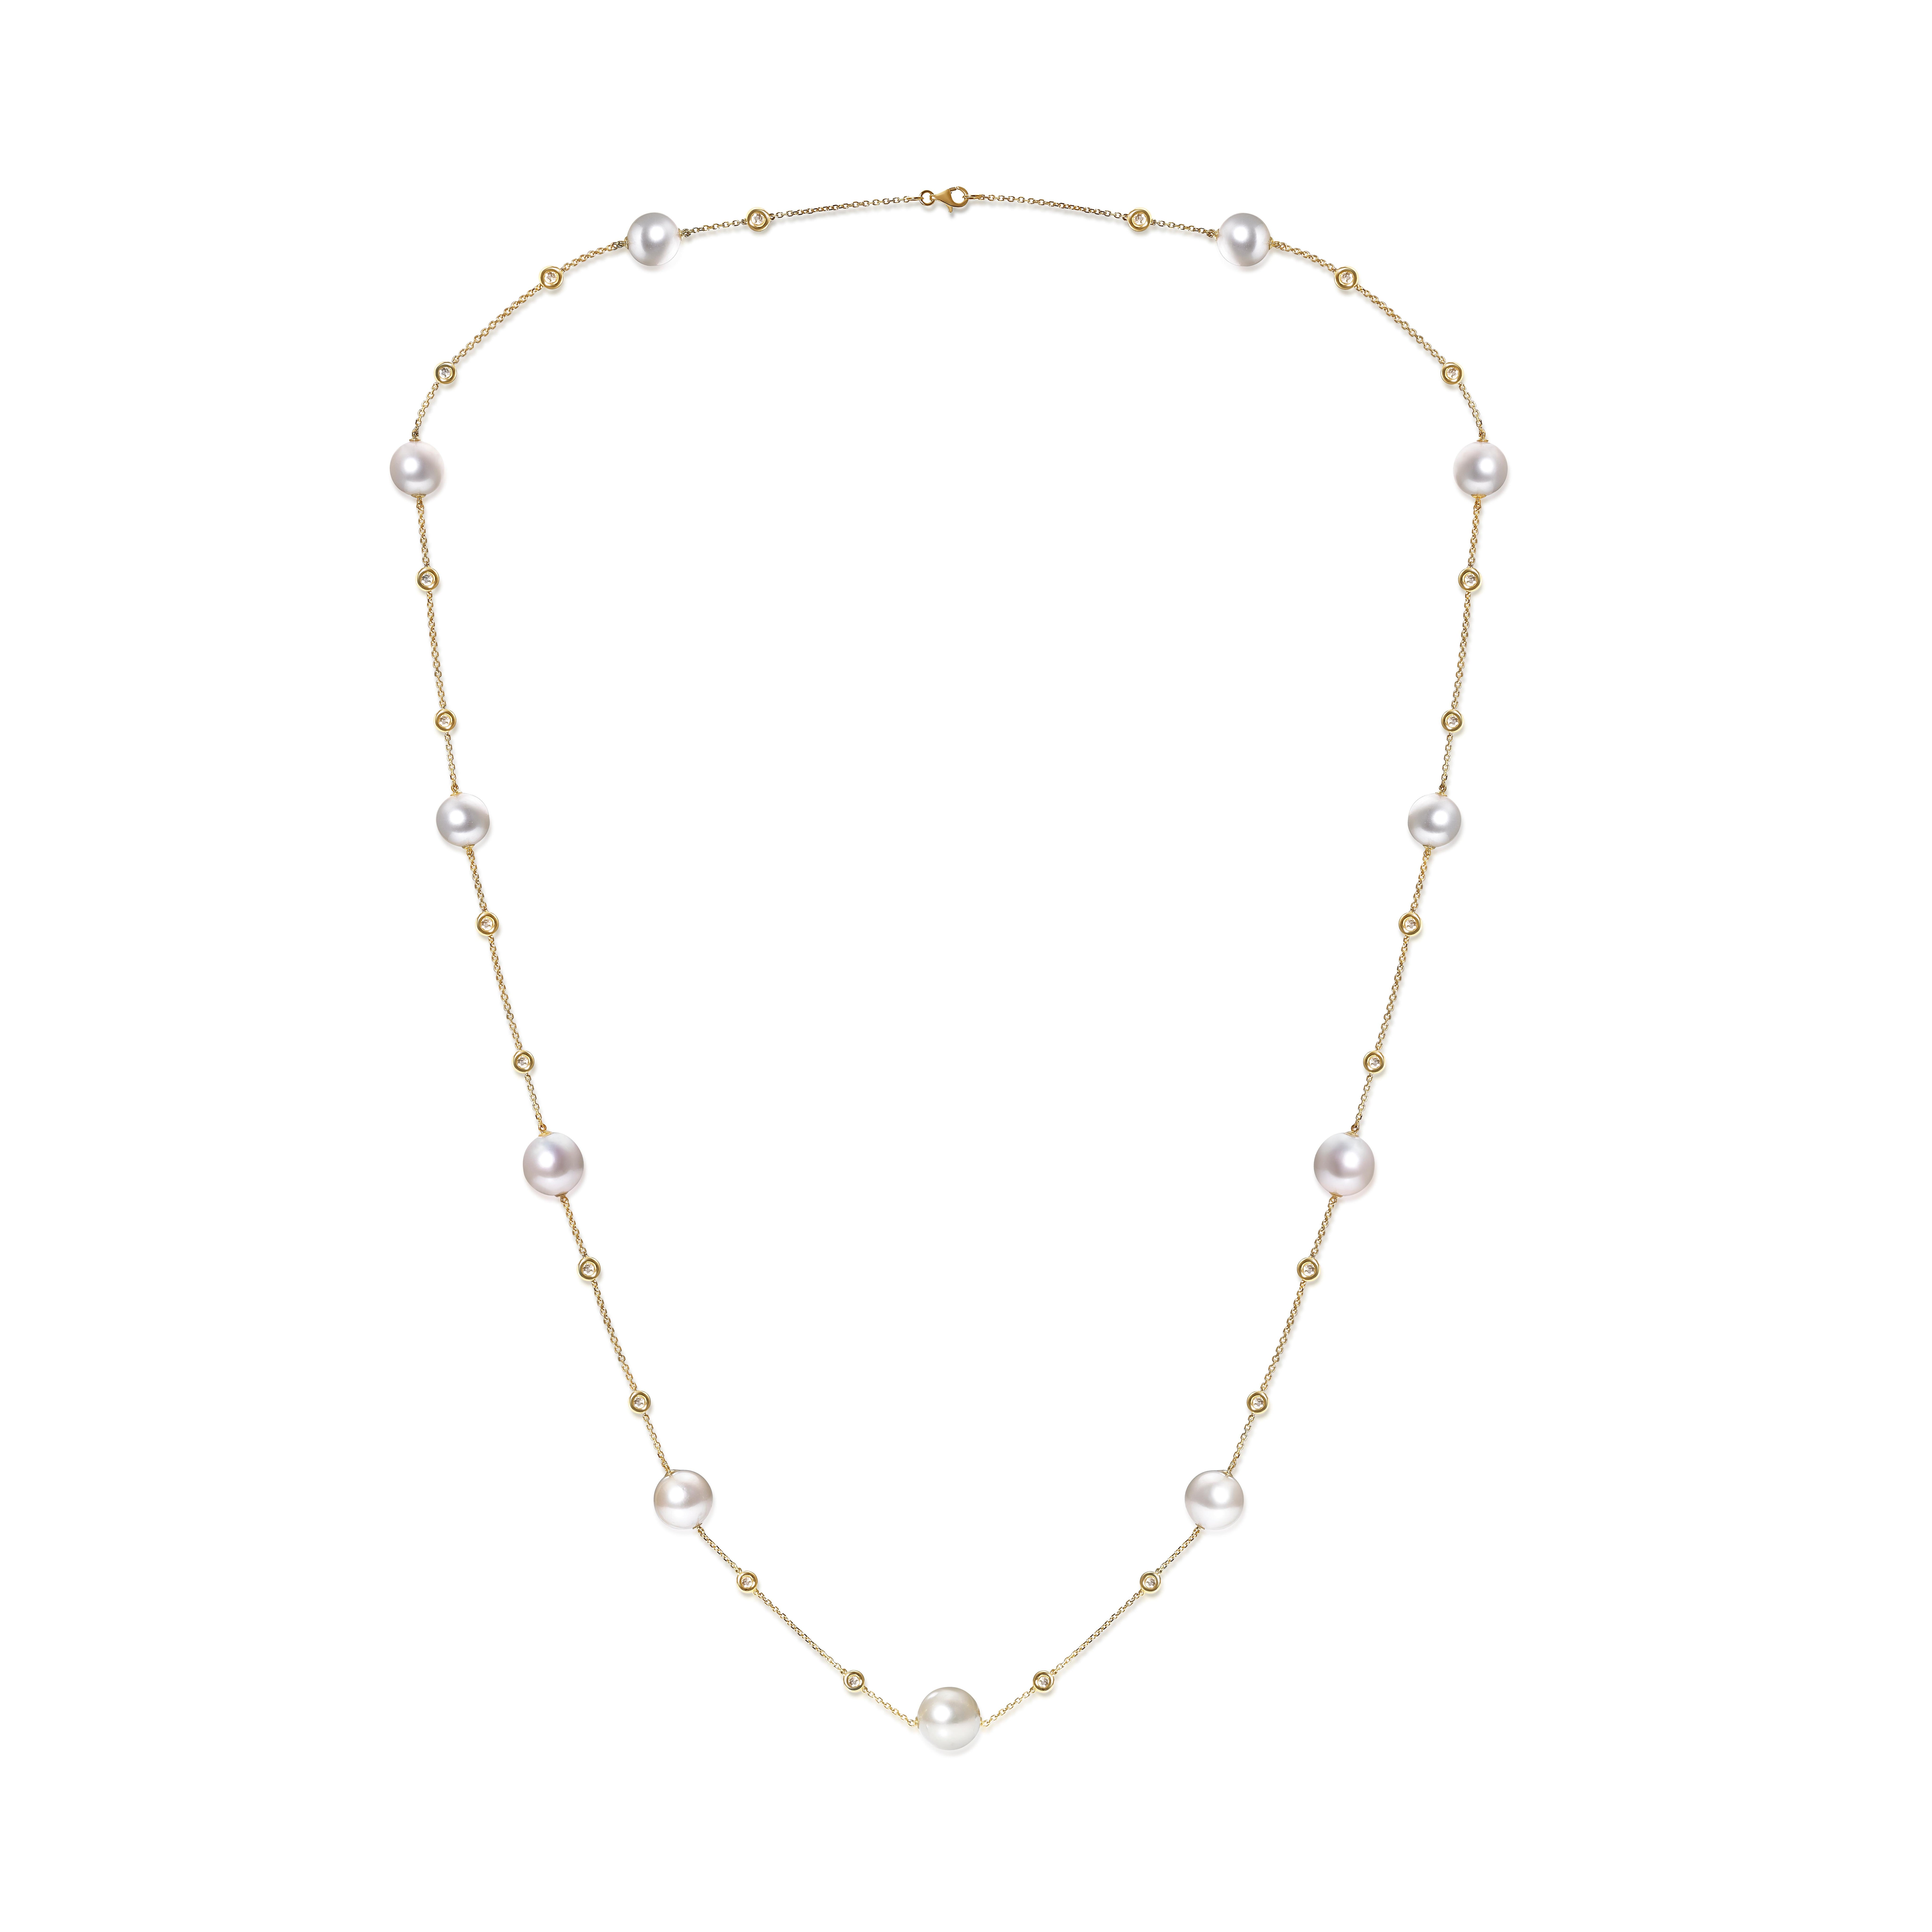 The pearls symbolize innocence, beauty, sincerity, and new beginnings. This is what makes the pearl a true classic for bridal jewelry.

The necklace as the pearl 11 pieces, and the side diamond as 1.58 carat, made in 18K yellow gold, necklace size